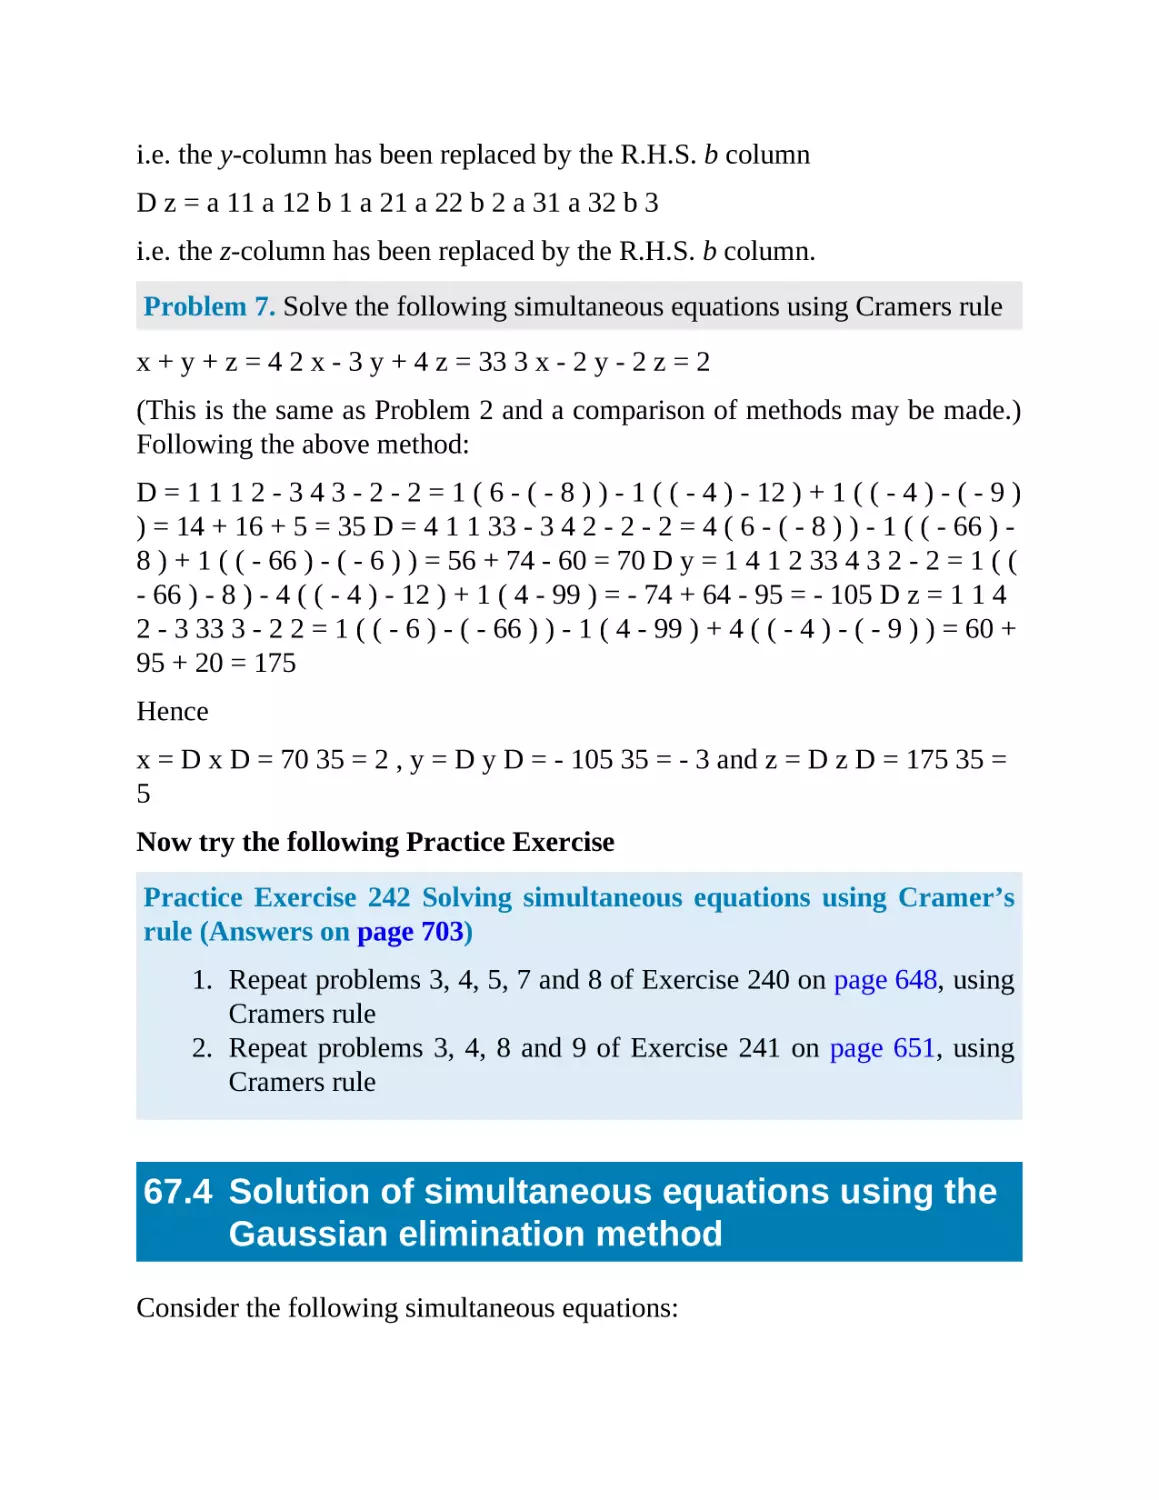 67.4 Solution of simultaneous equations using the Gaussian elimination method